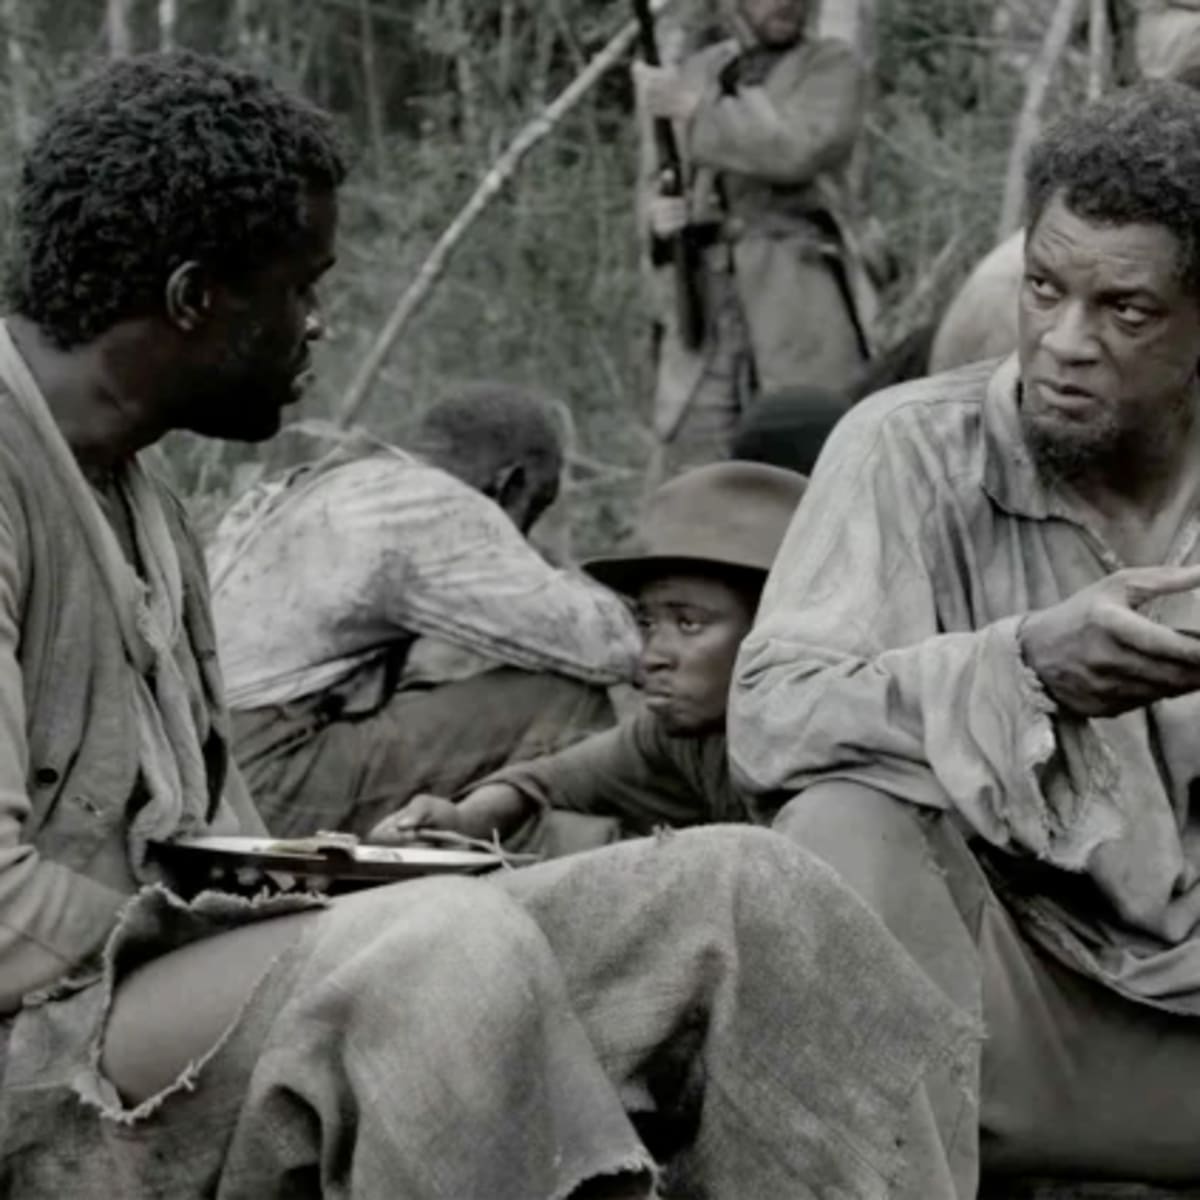 Will Smith Film Emancipation on Black Union Soldier Whipped